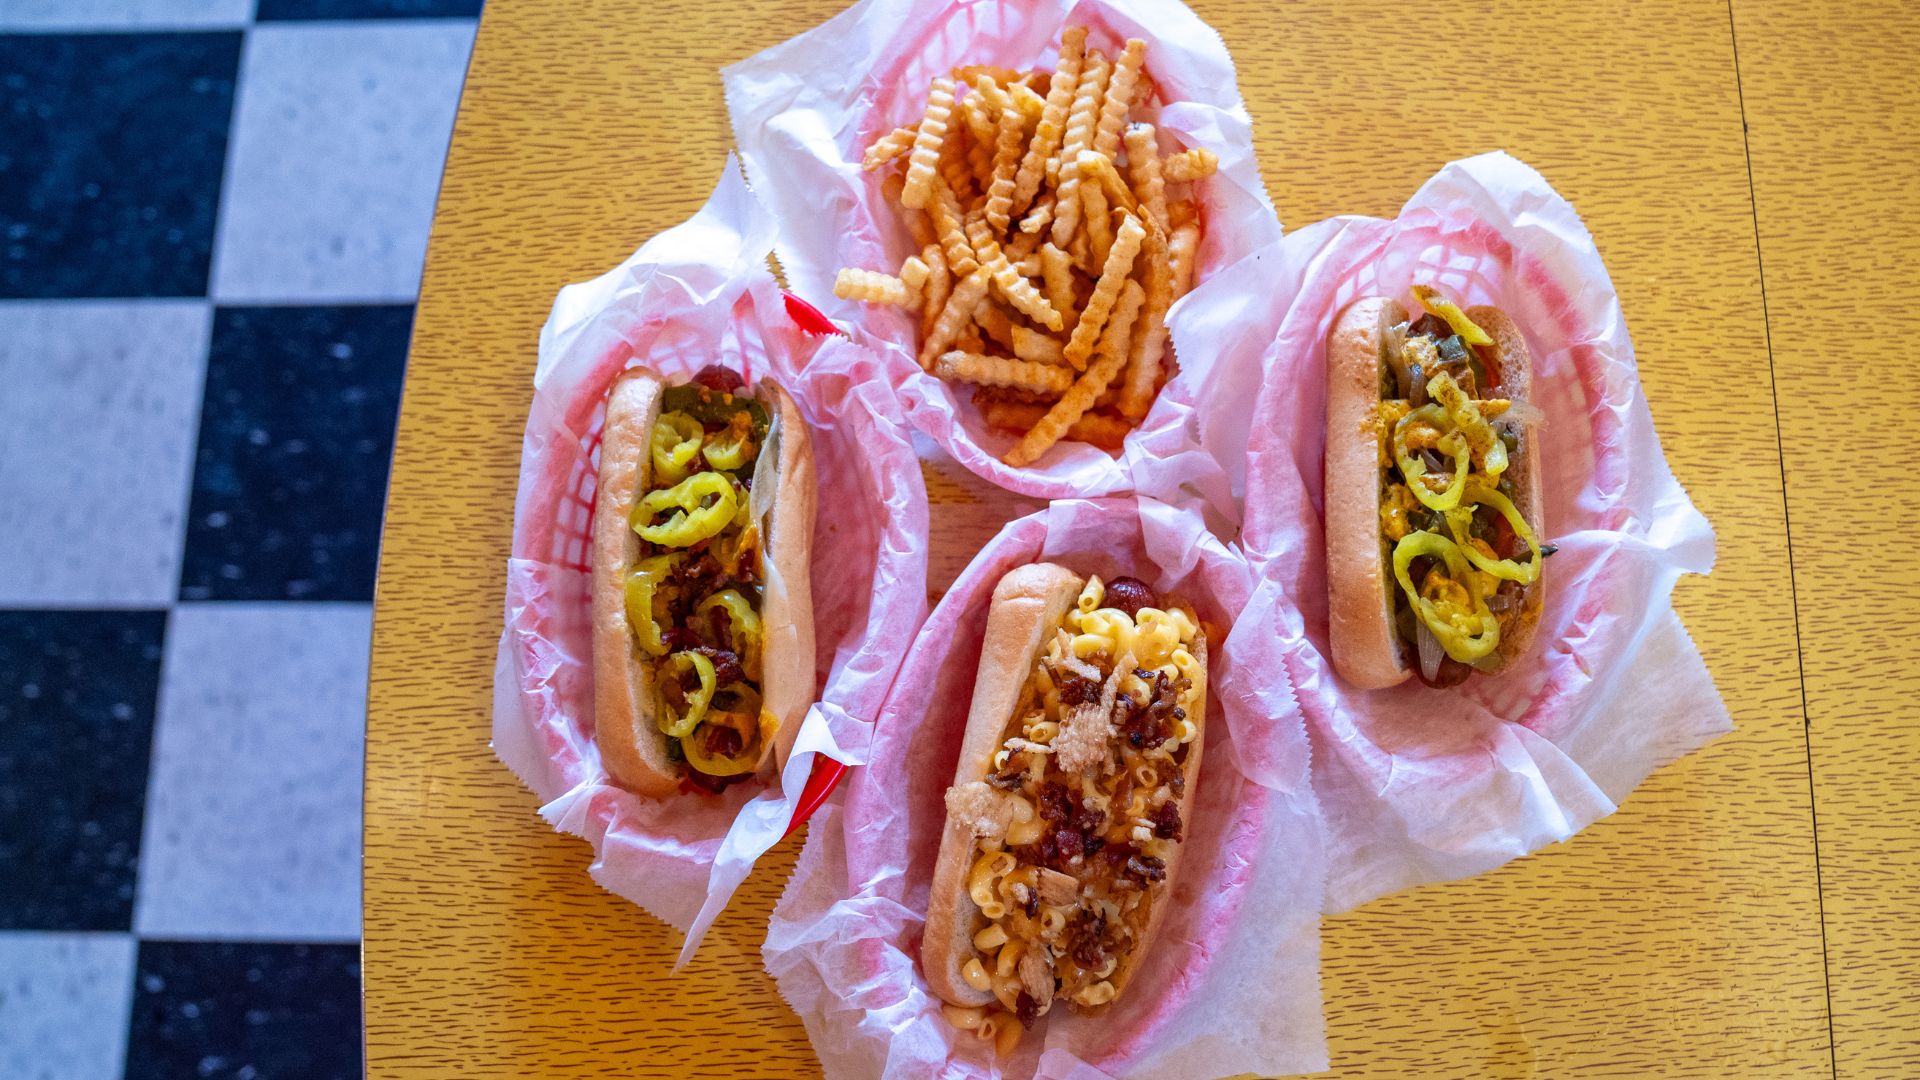 Steve's Hot Dogs serves cold-smoked, fire-grilled hot dogs and crinkle fries.